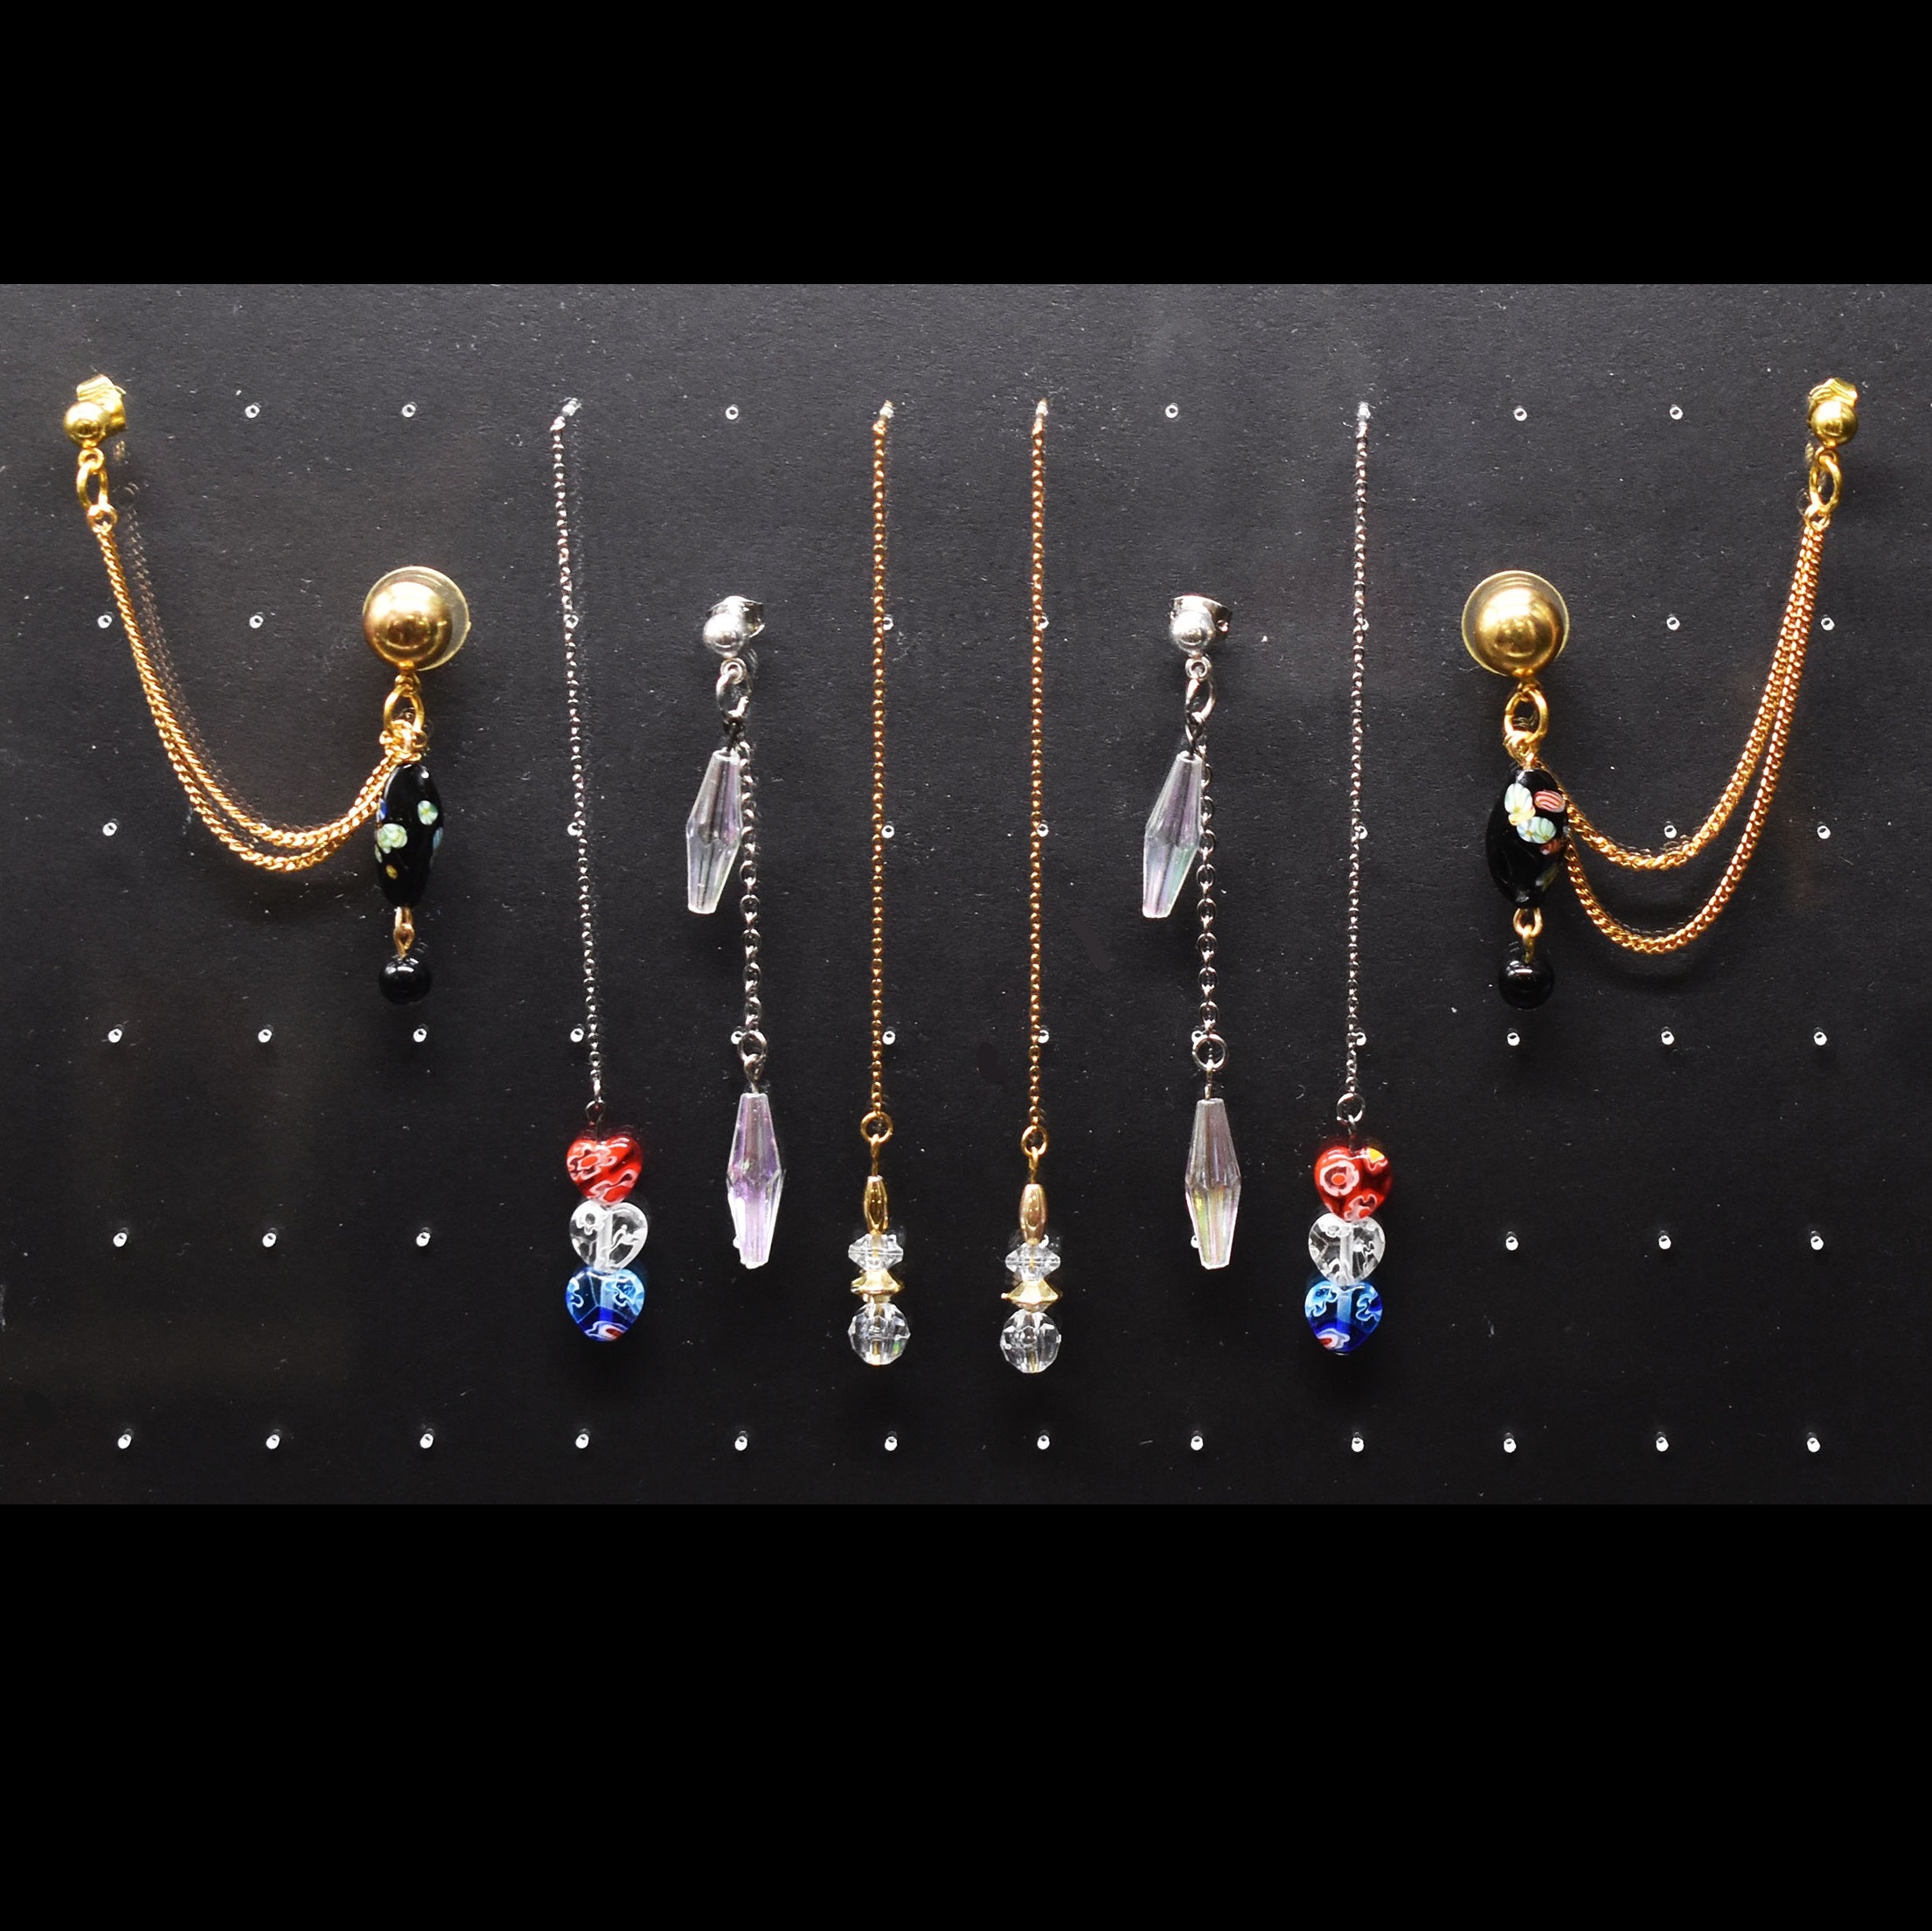 Several pairs of earrings with chain accents